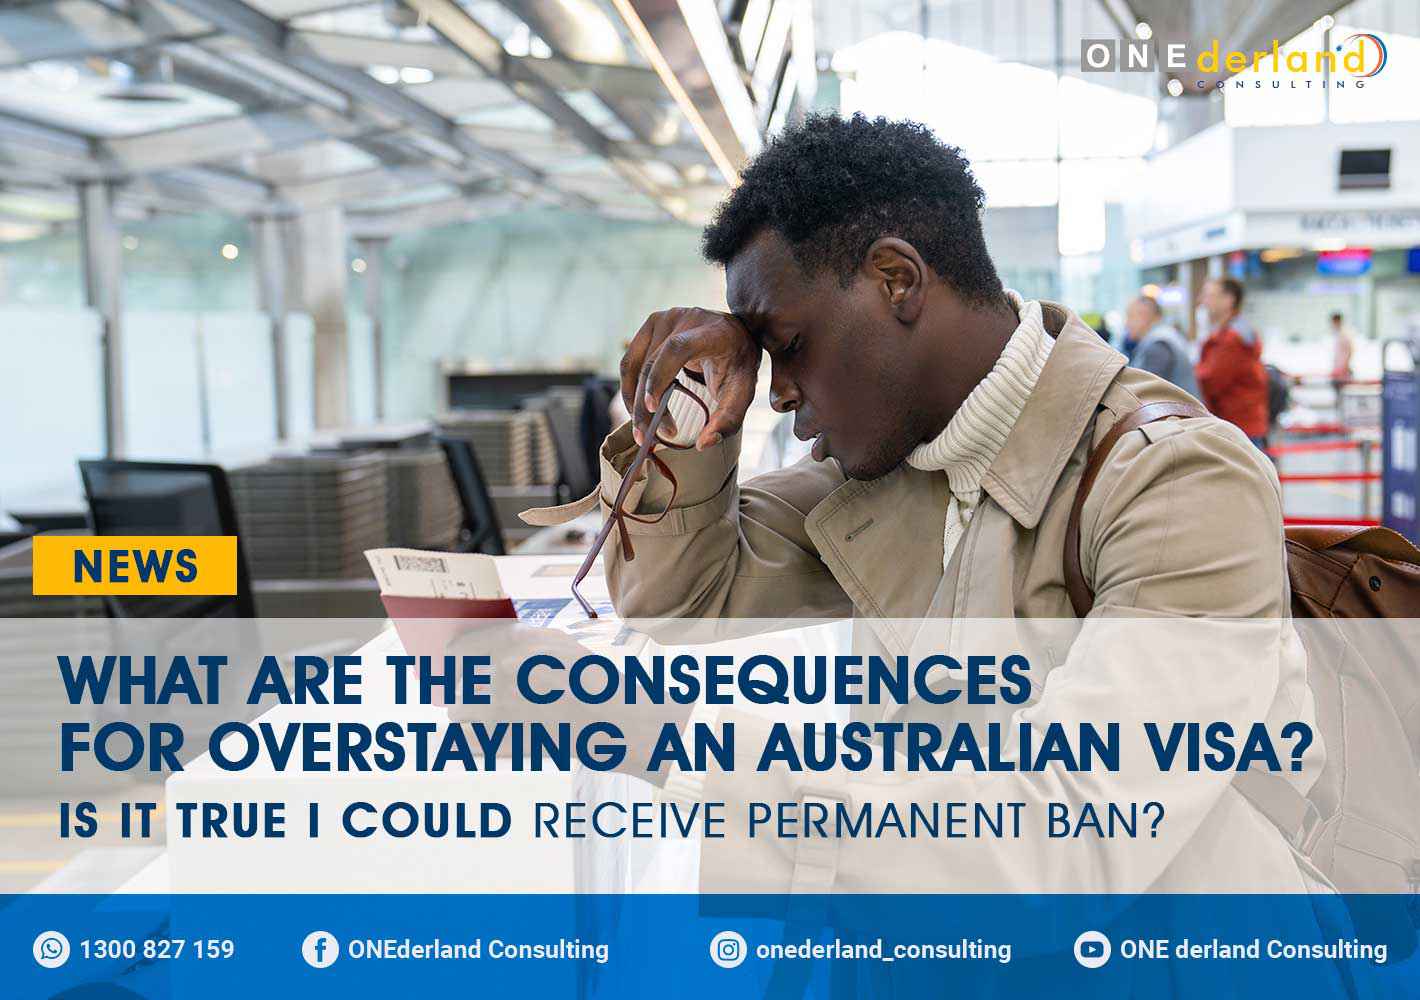 What Are the Consequences for Overstaying an Australian Visa Is It True I Could Receive Permanent Ban